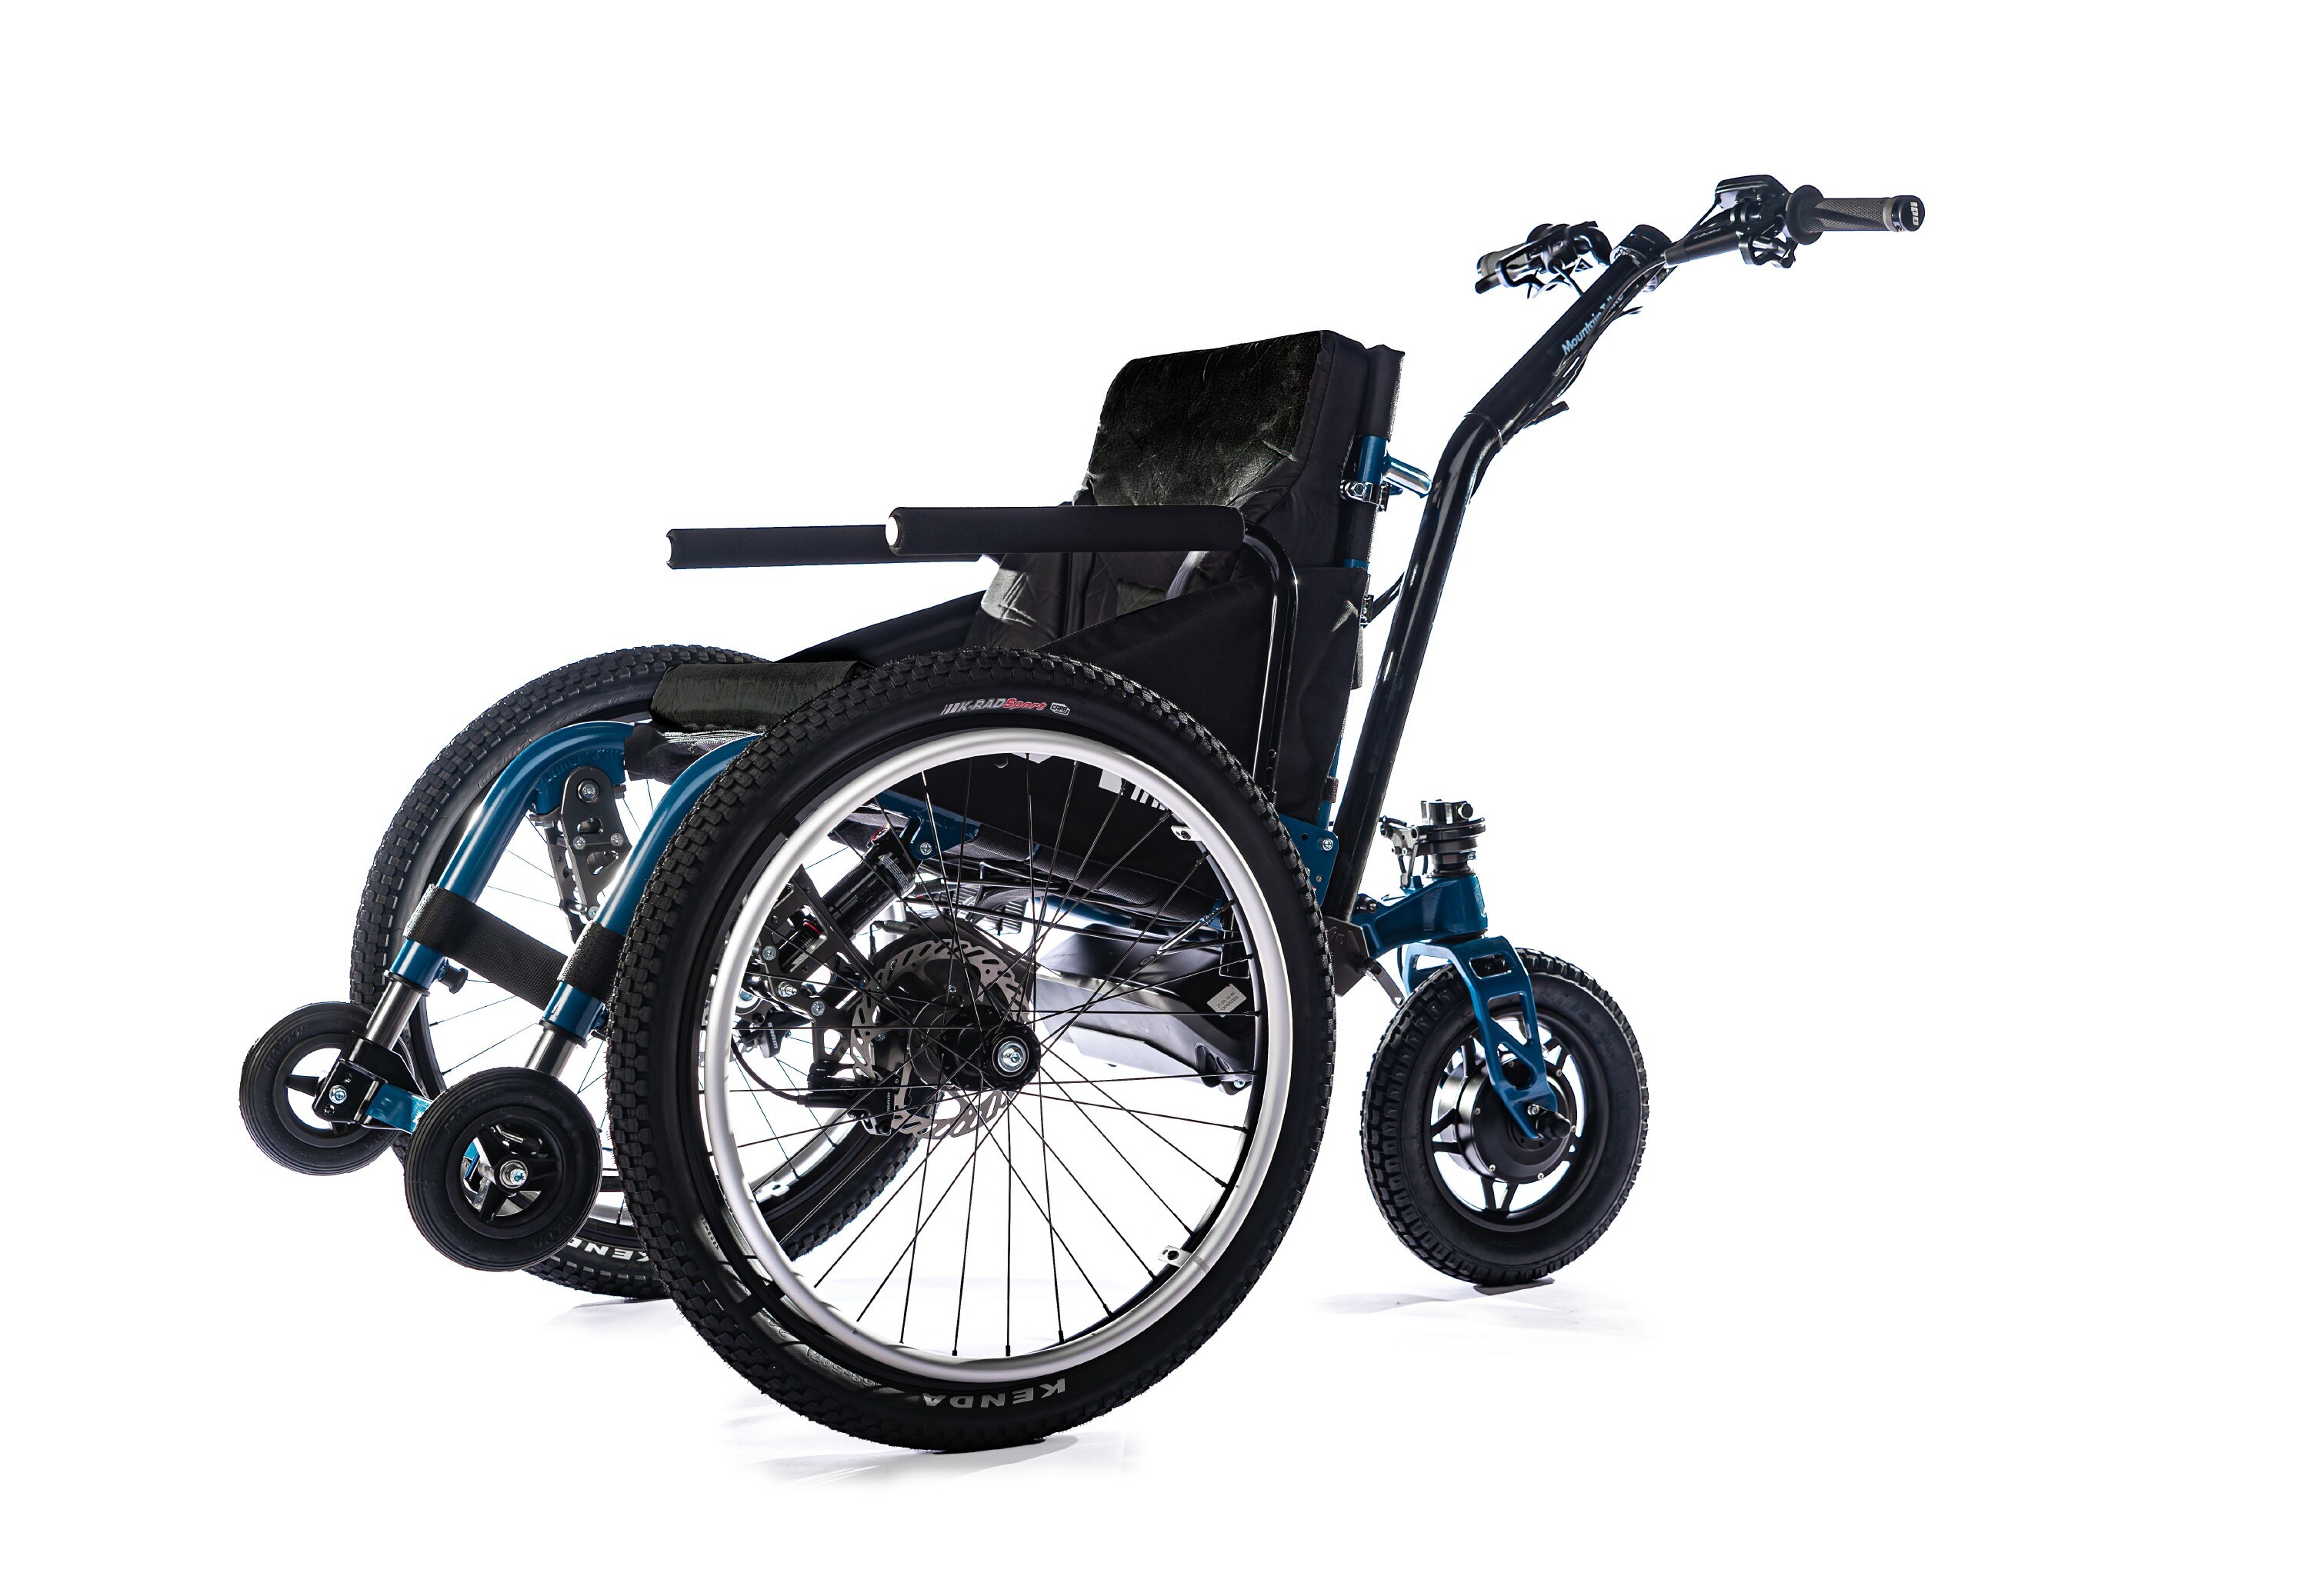 Going Electric - new powered attendant all terrain wheelchair